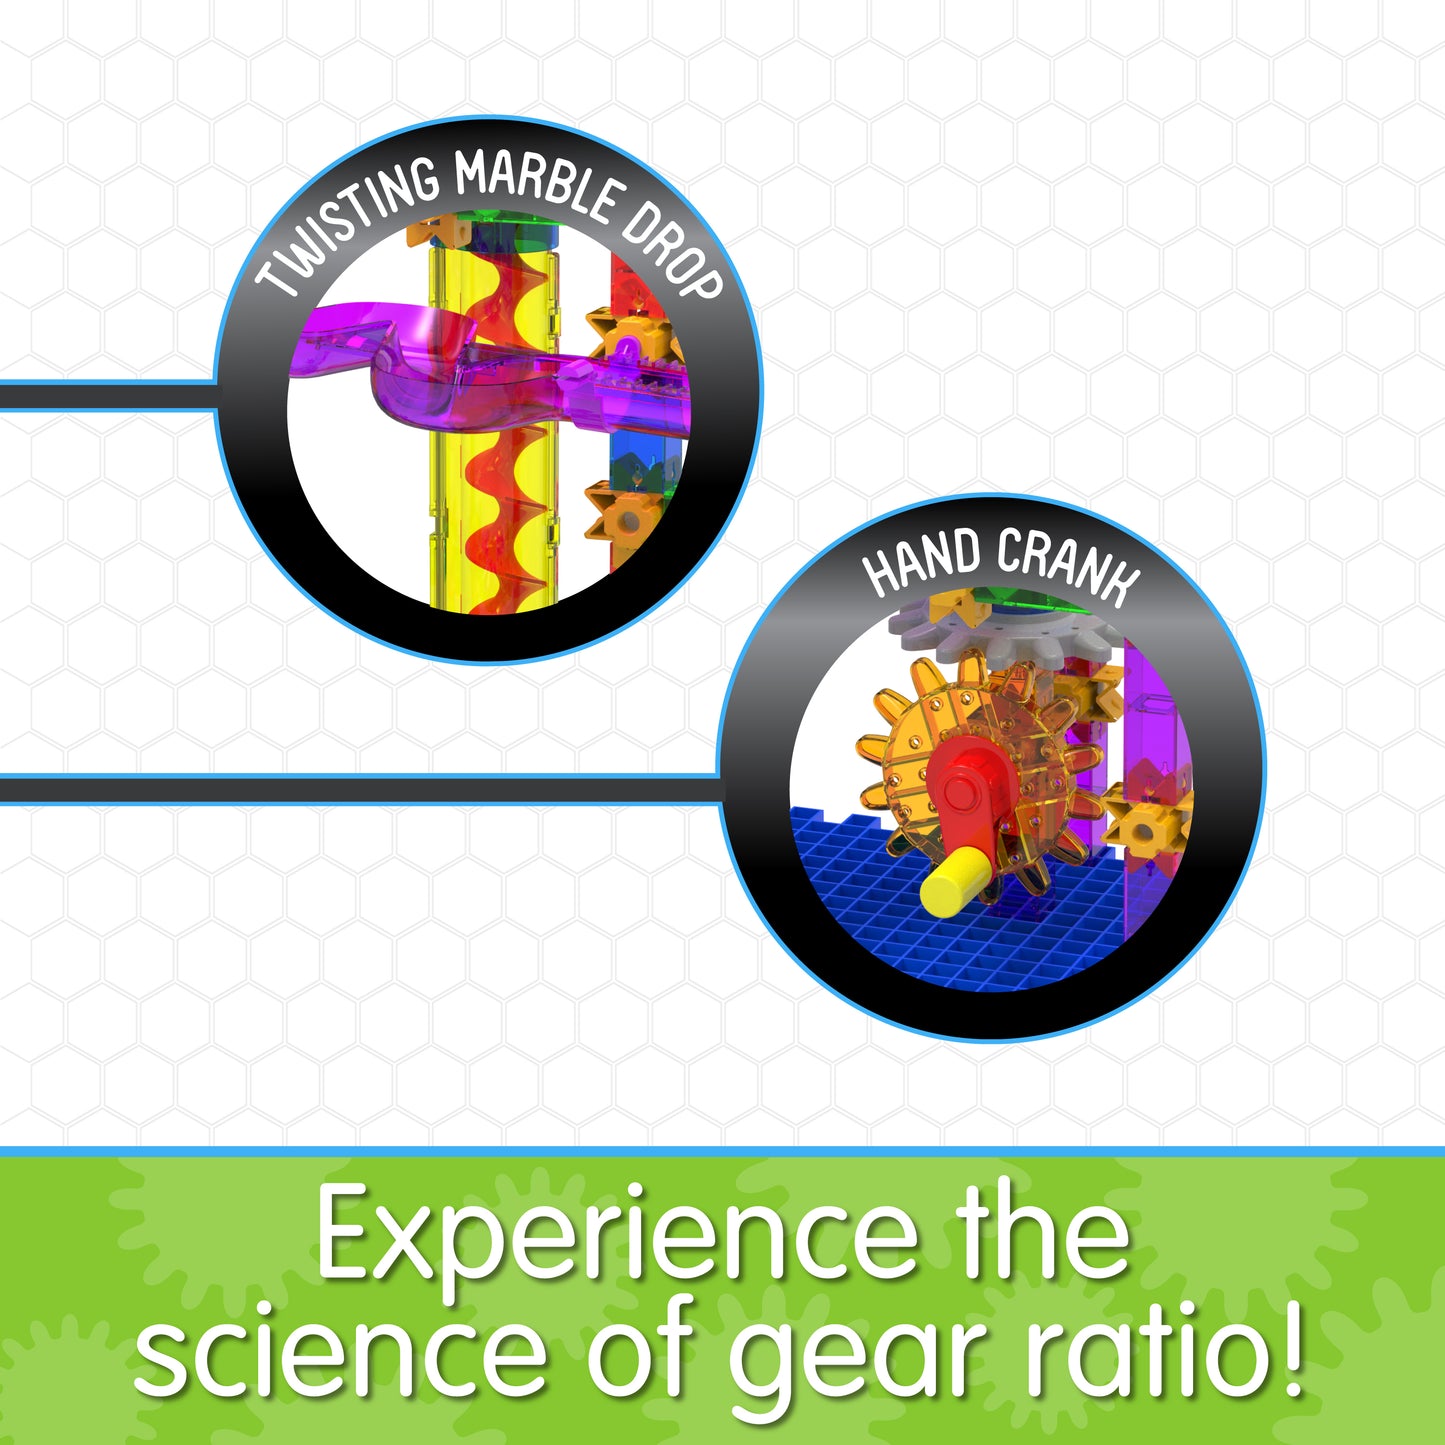 Infographic about Twister's features that says, "Experience the science of gear ratio!"